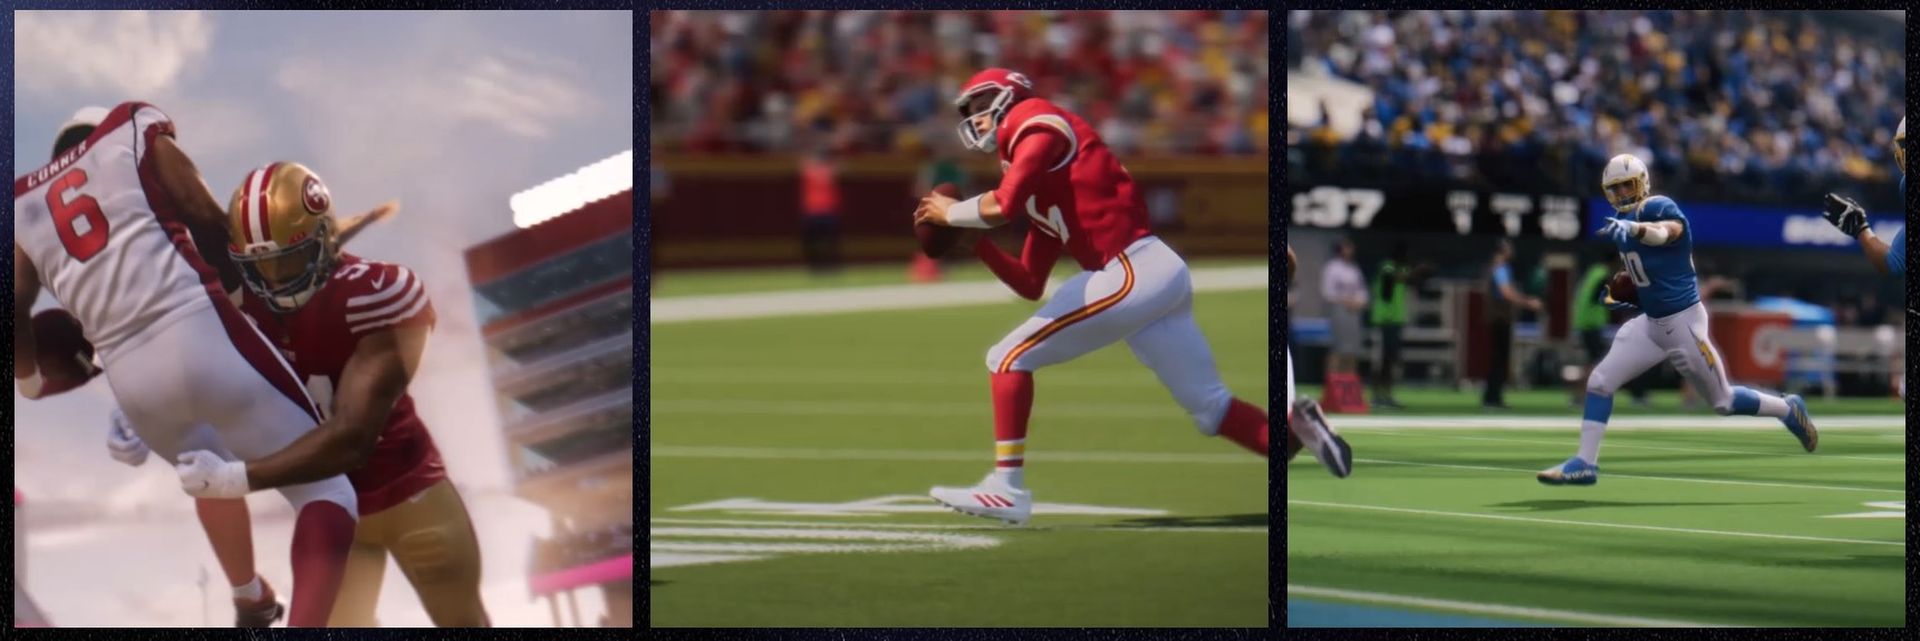 Madden 24 game pass not working: How to fix it